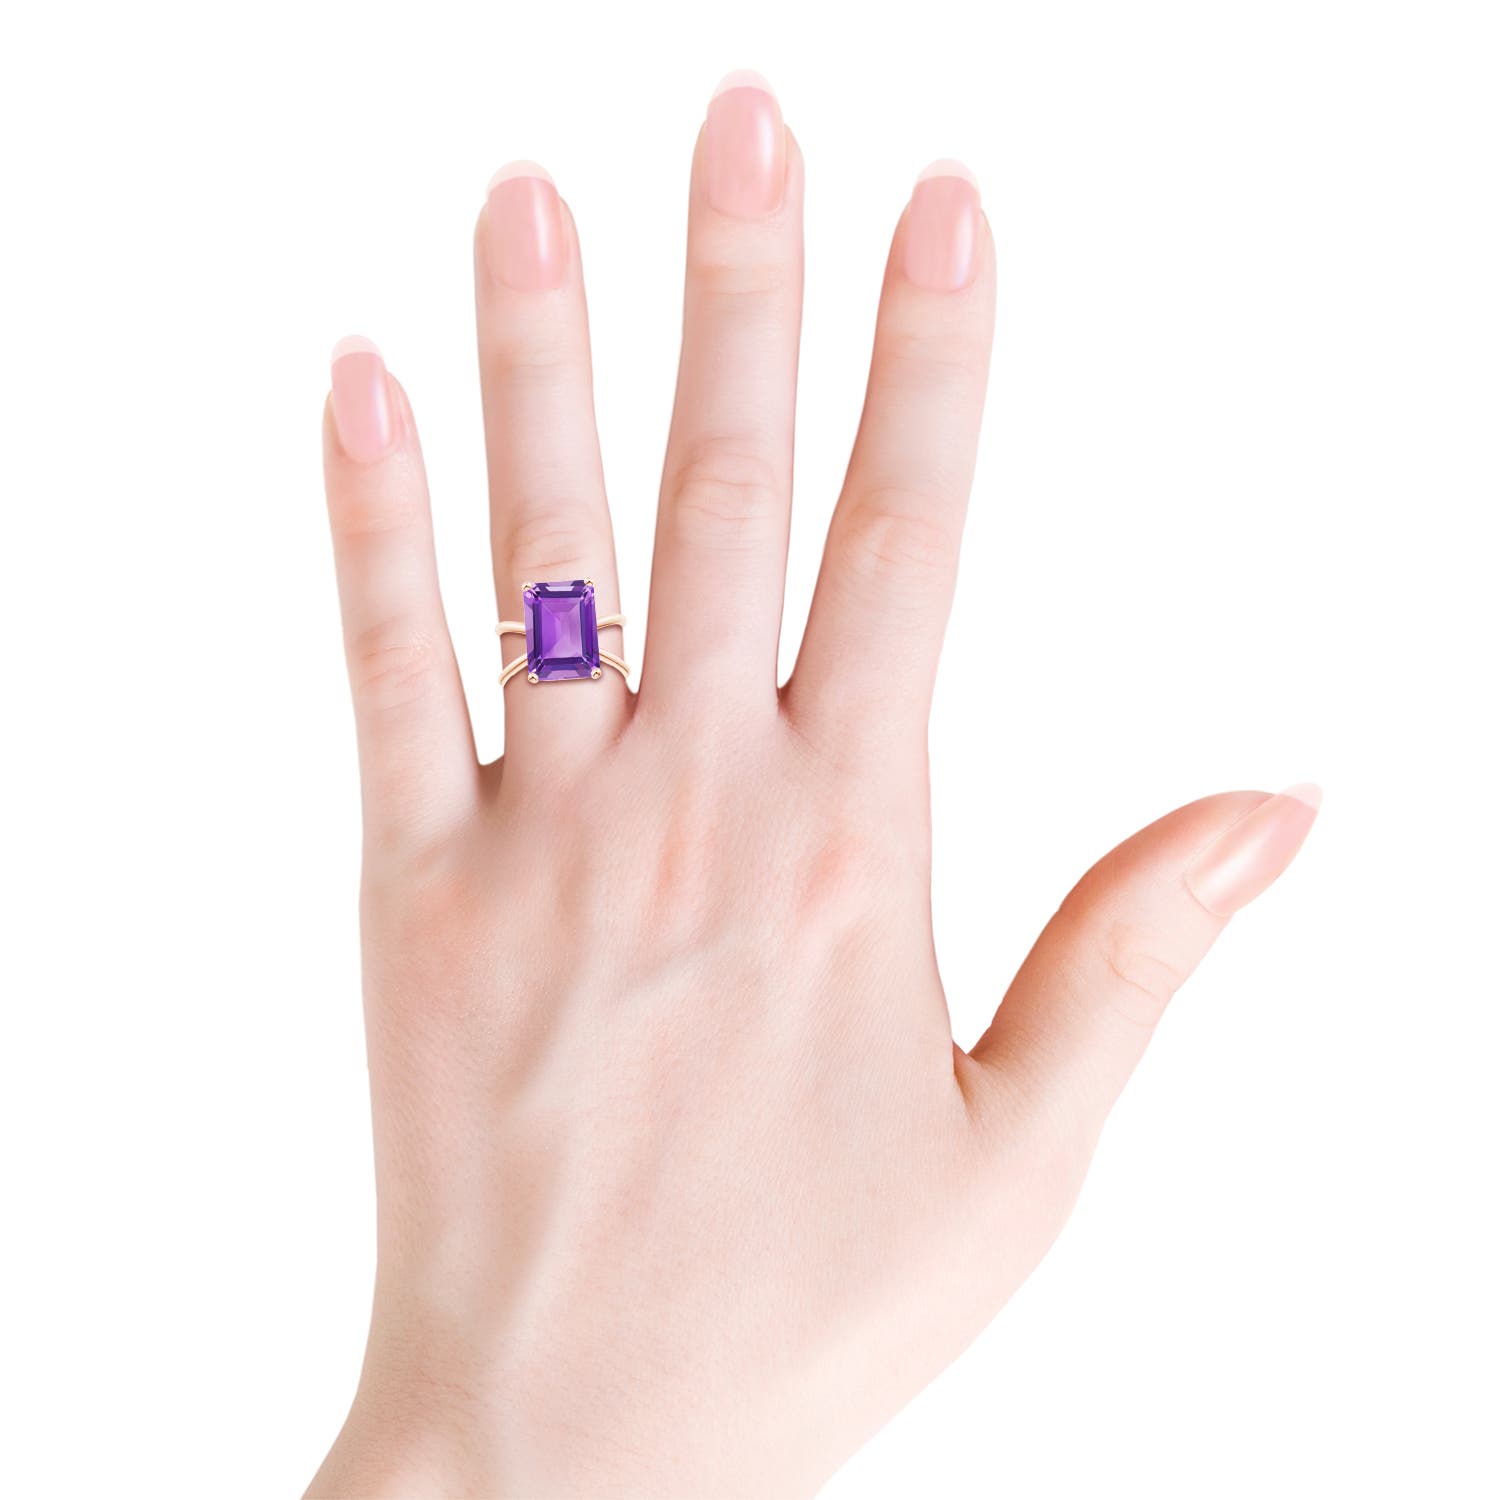 AA - Amethyst / 6.5 CT / 14 KT Rose Gold